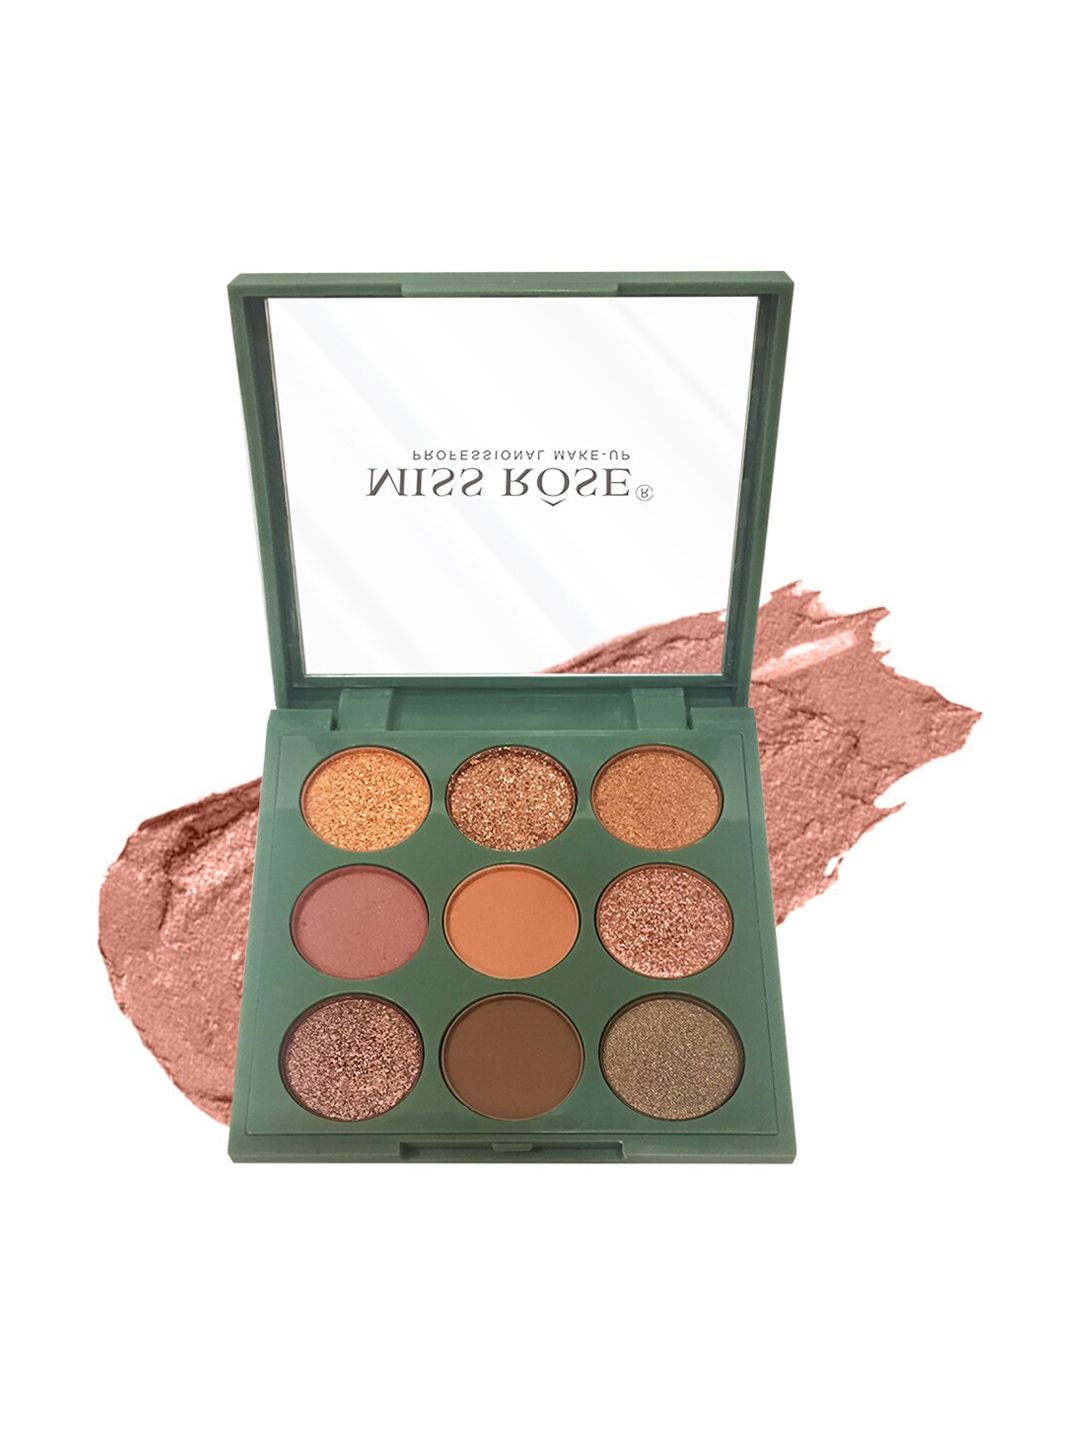 MISS ROSE 9 Color Matte & Glitter Mini Eyeshadow Palette 7001-122N2 Price in India